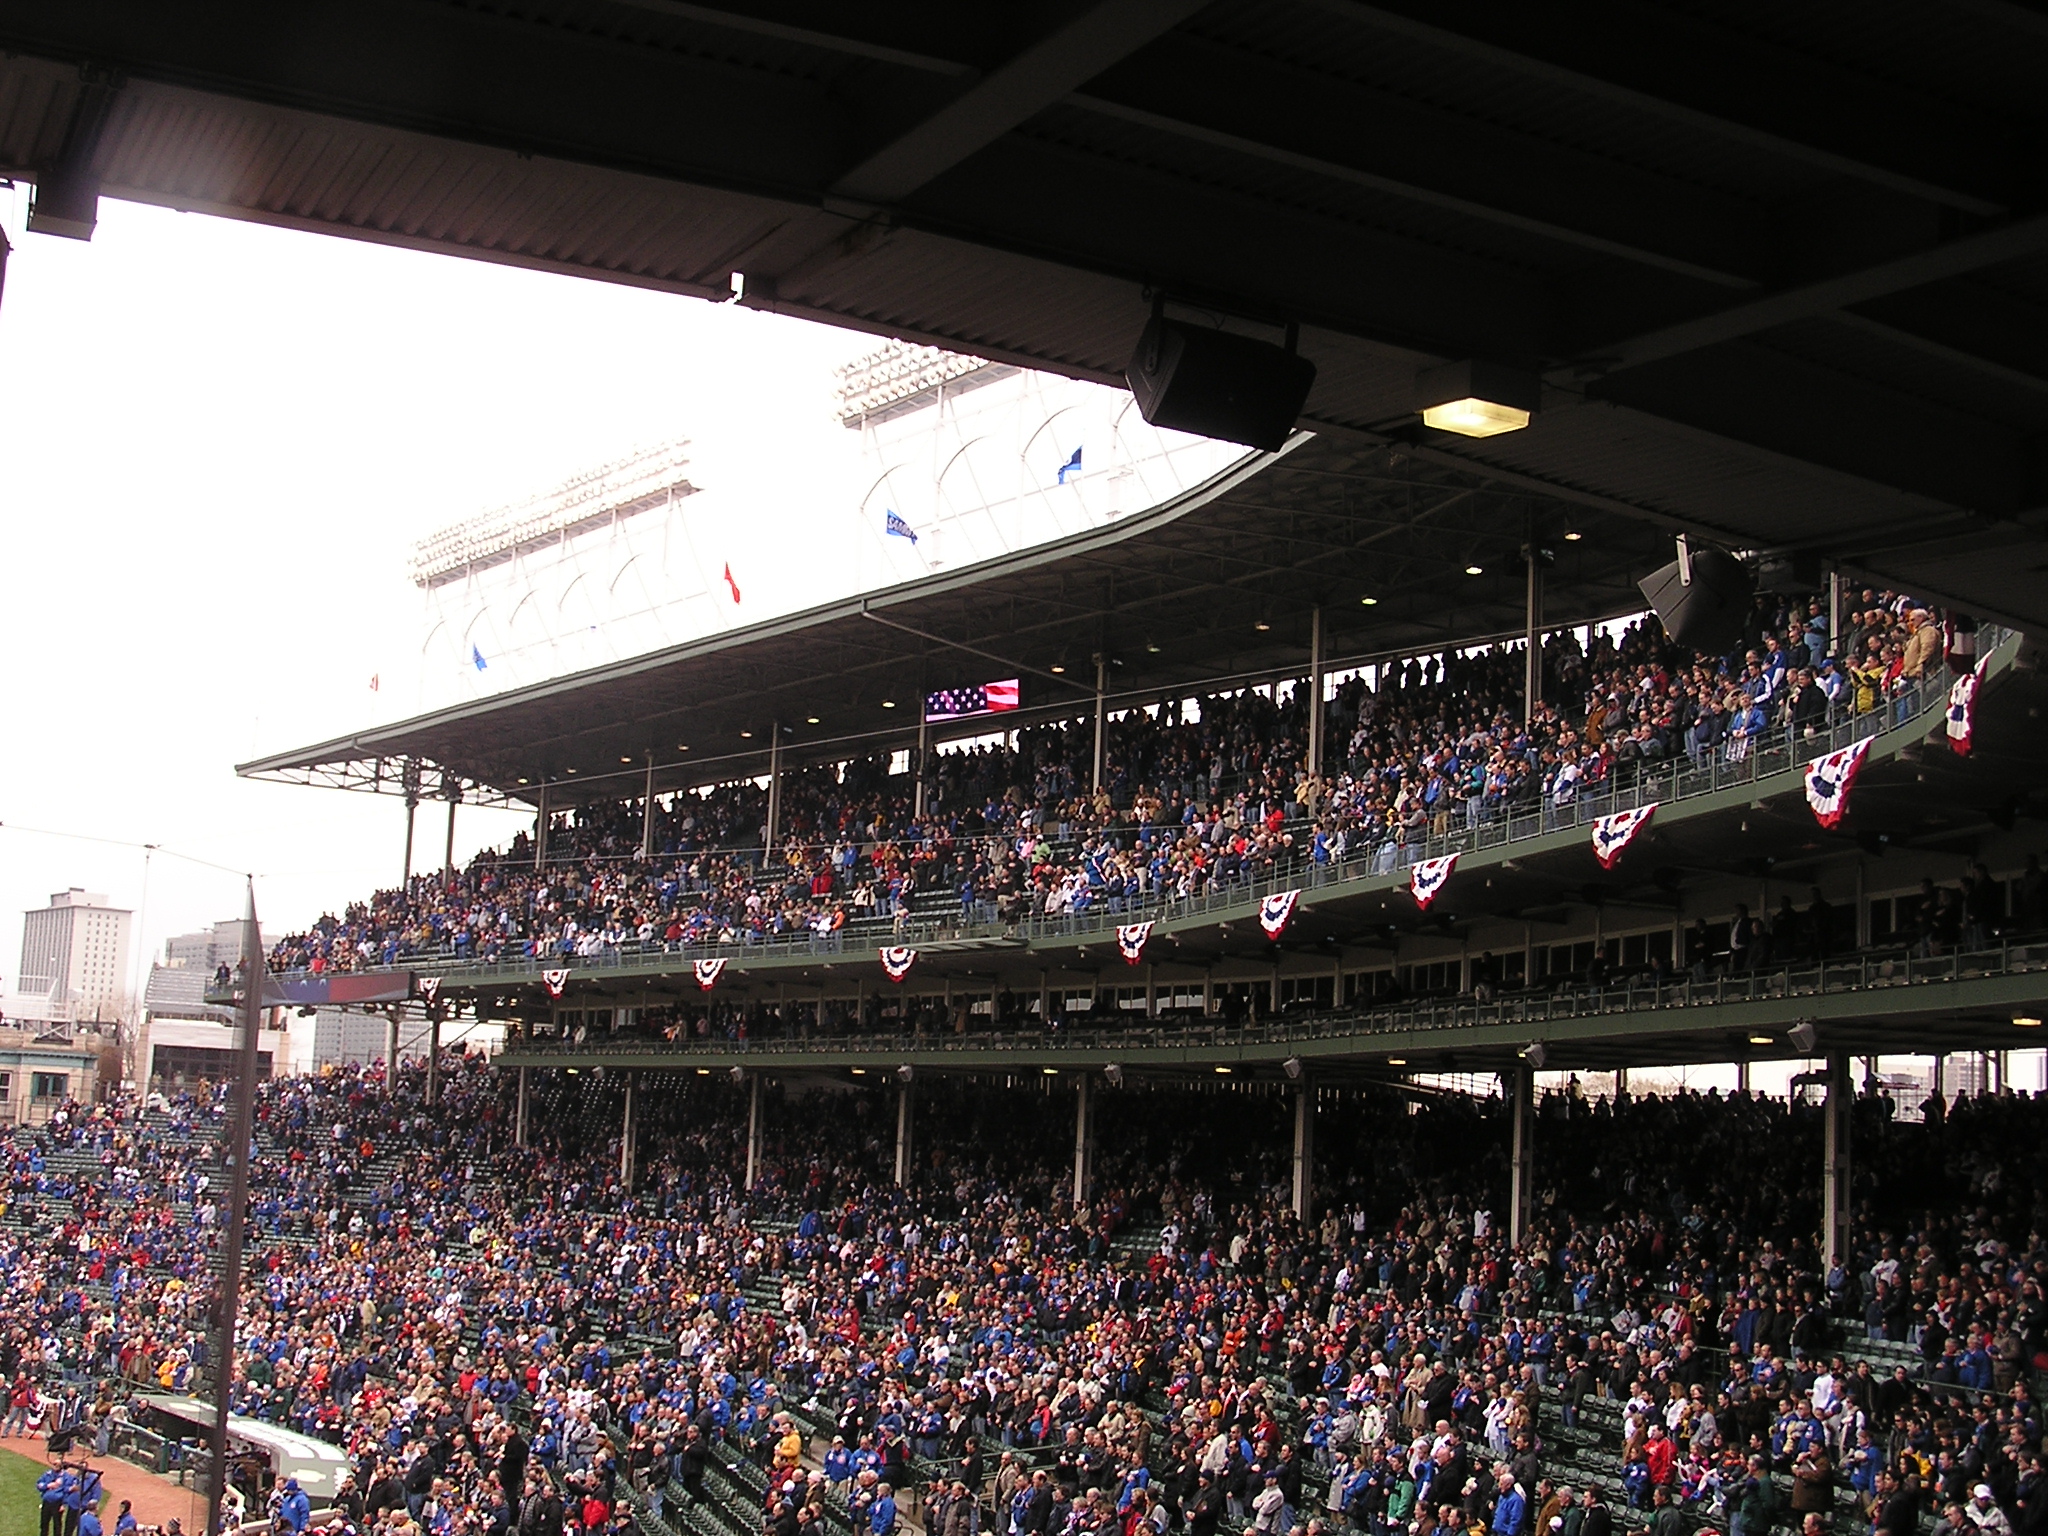 1st BASE STANDS - Wrigley Field, Chicago, Il